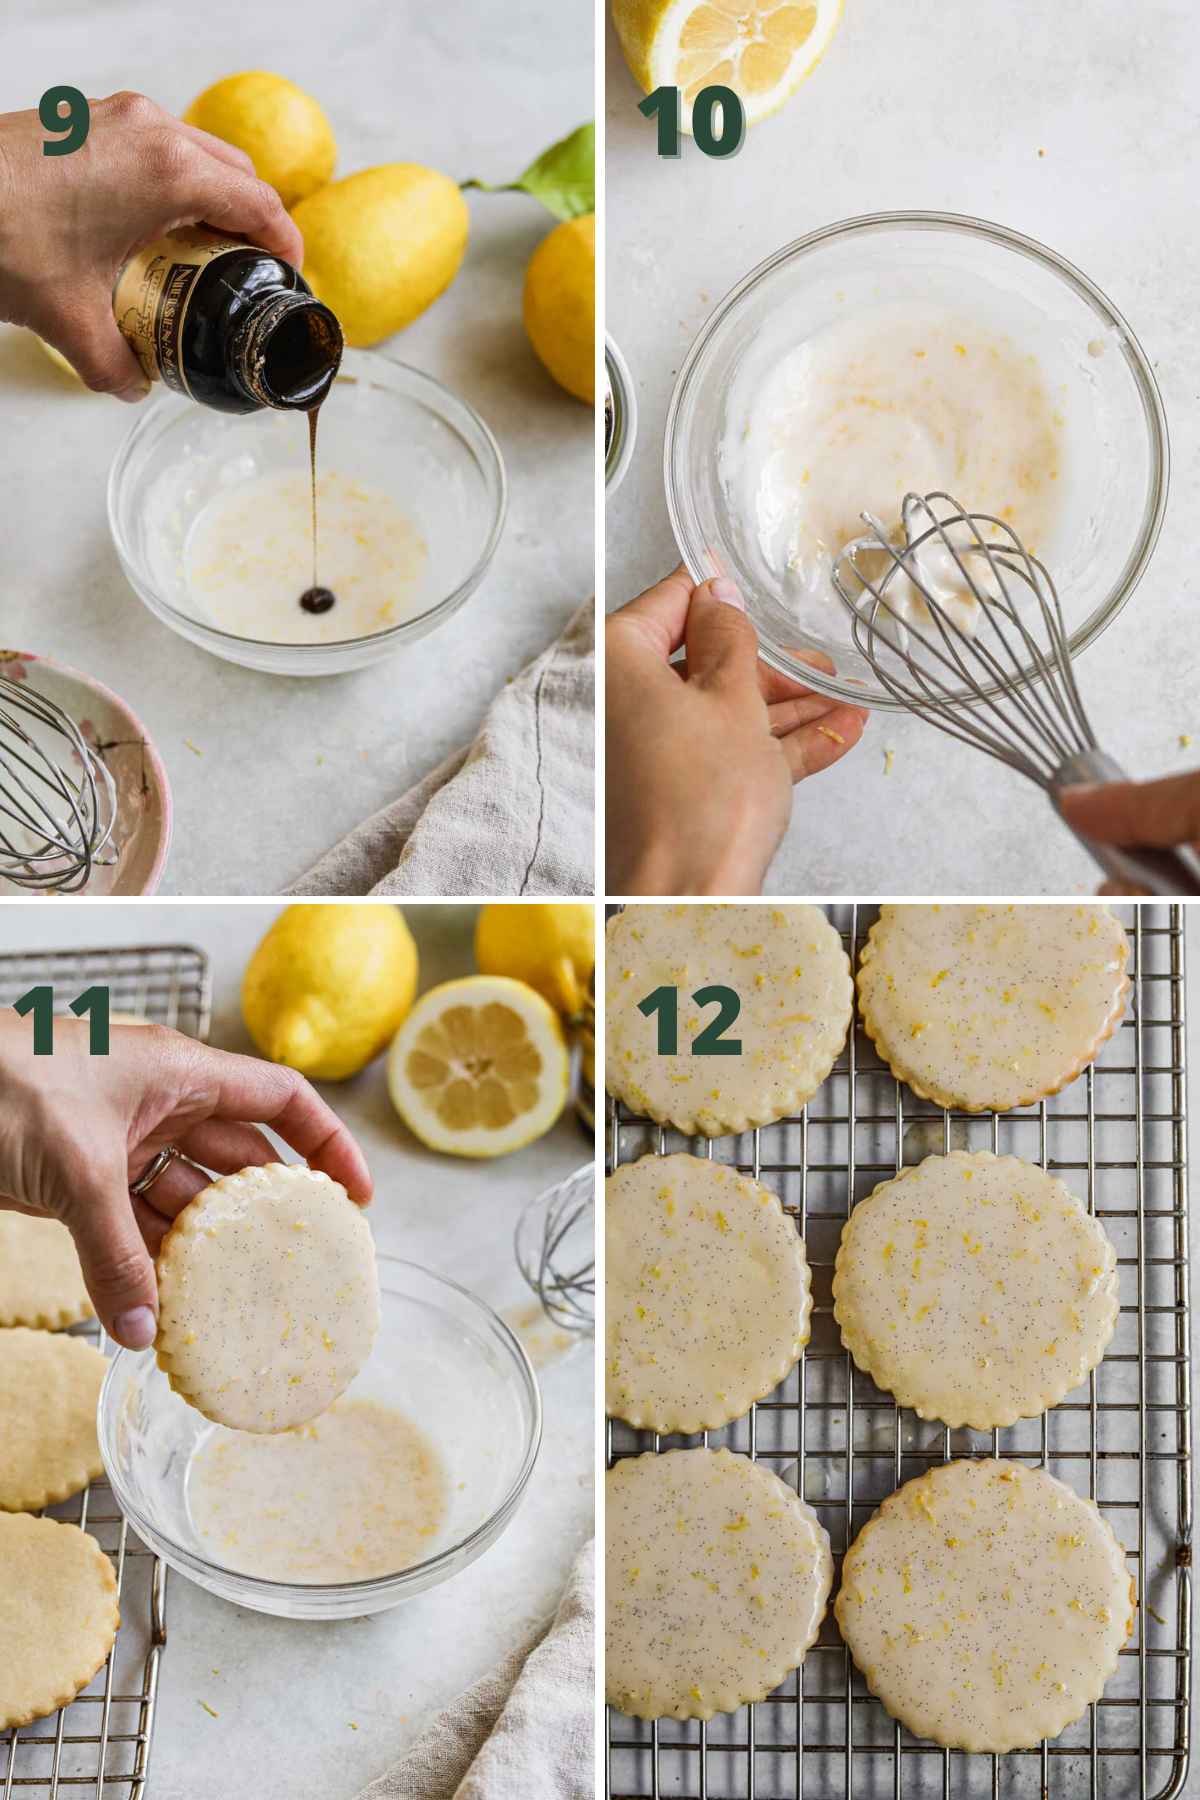 Steps to make shortbread cookies with lemon glaze, whisking powdered sugar, vanilla bean paste, lemon juice and zest to make glaze, dipping cookies, and setting the cookies.